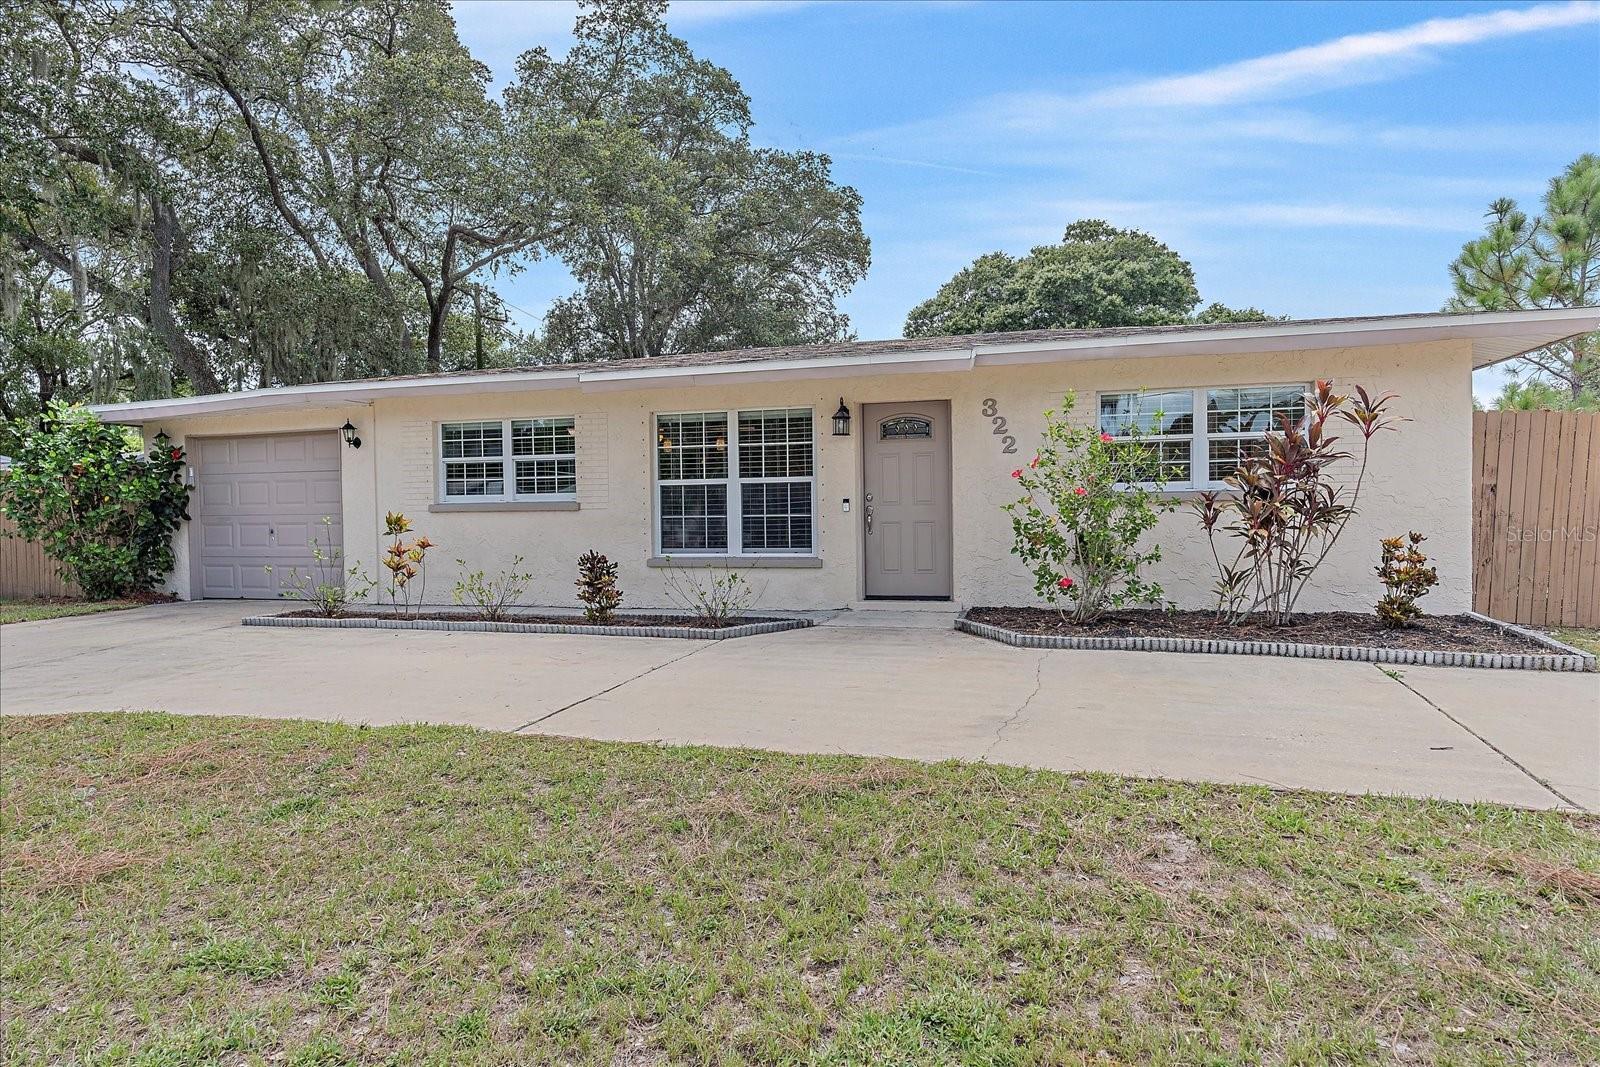 Photo one of 322 Midwest Pkwy Sarasota FL 34232 | MLS A4607367